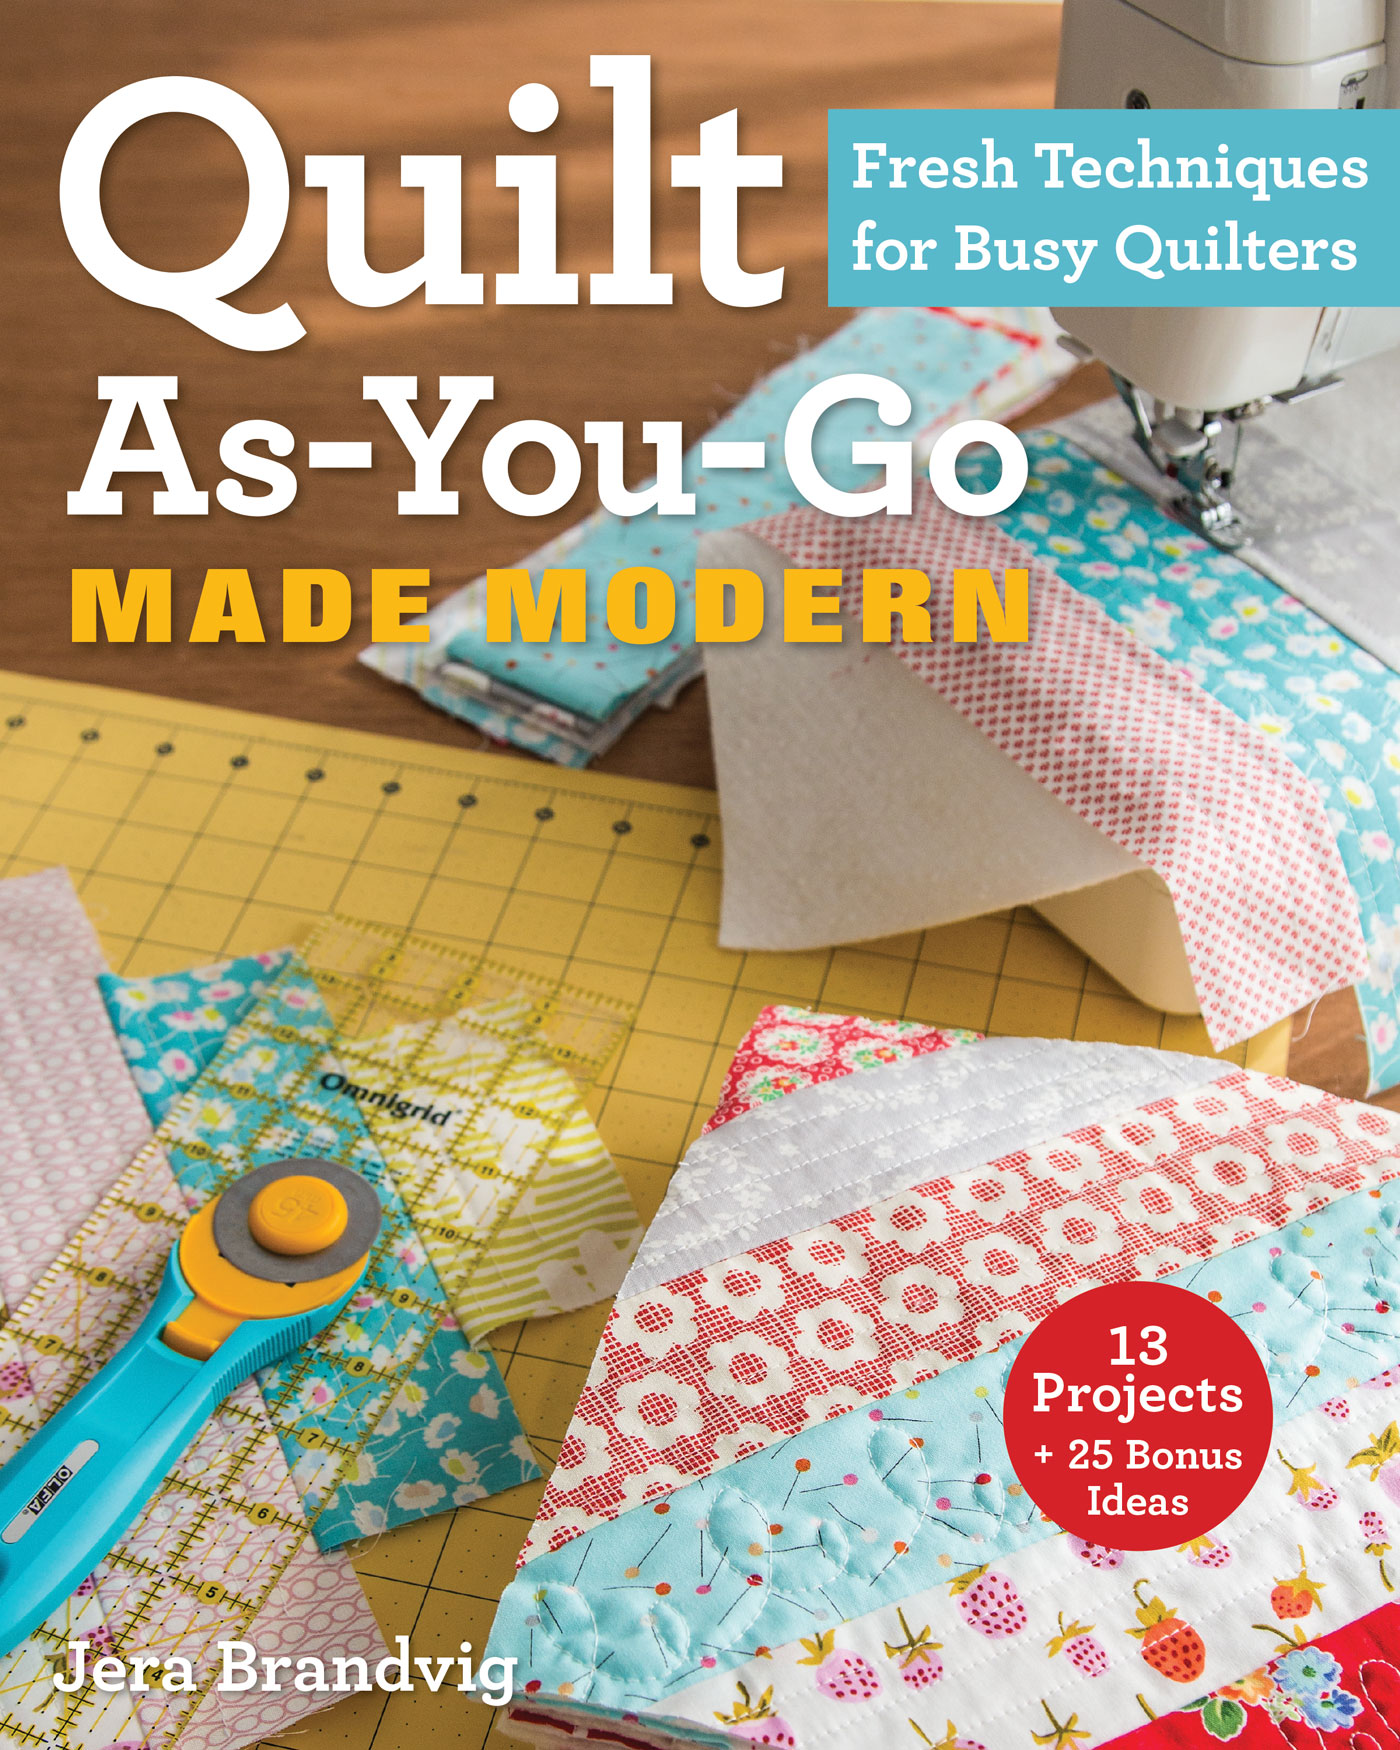 Quilt As-You-Go Made Clever by Jera Brandvig 9781644030233 - Quilt